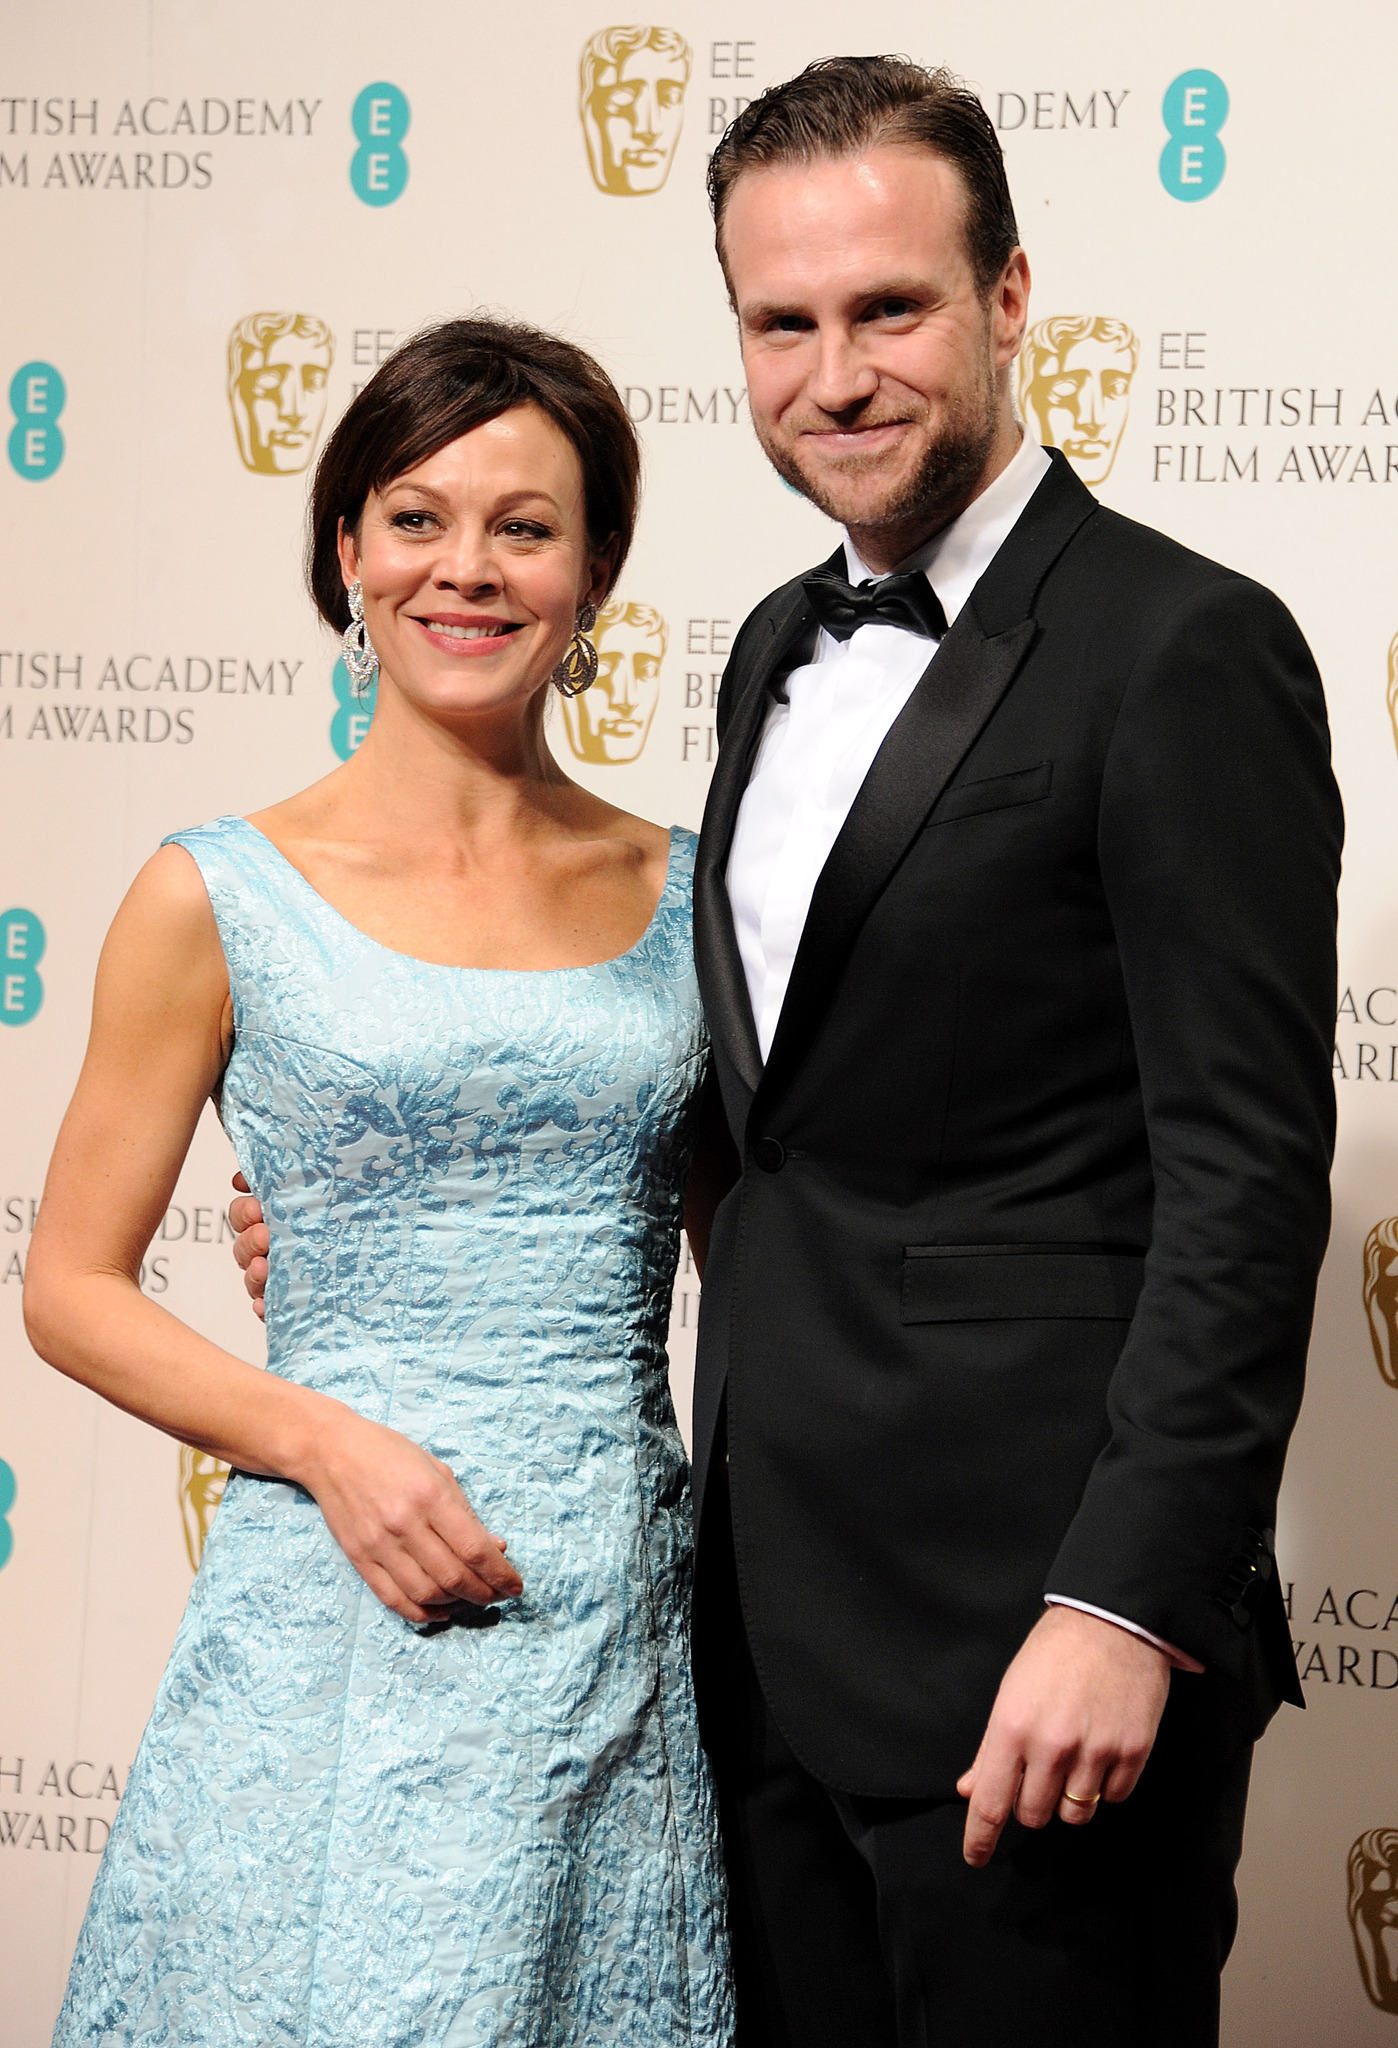 Helen McCrory and Rafe Spall